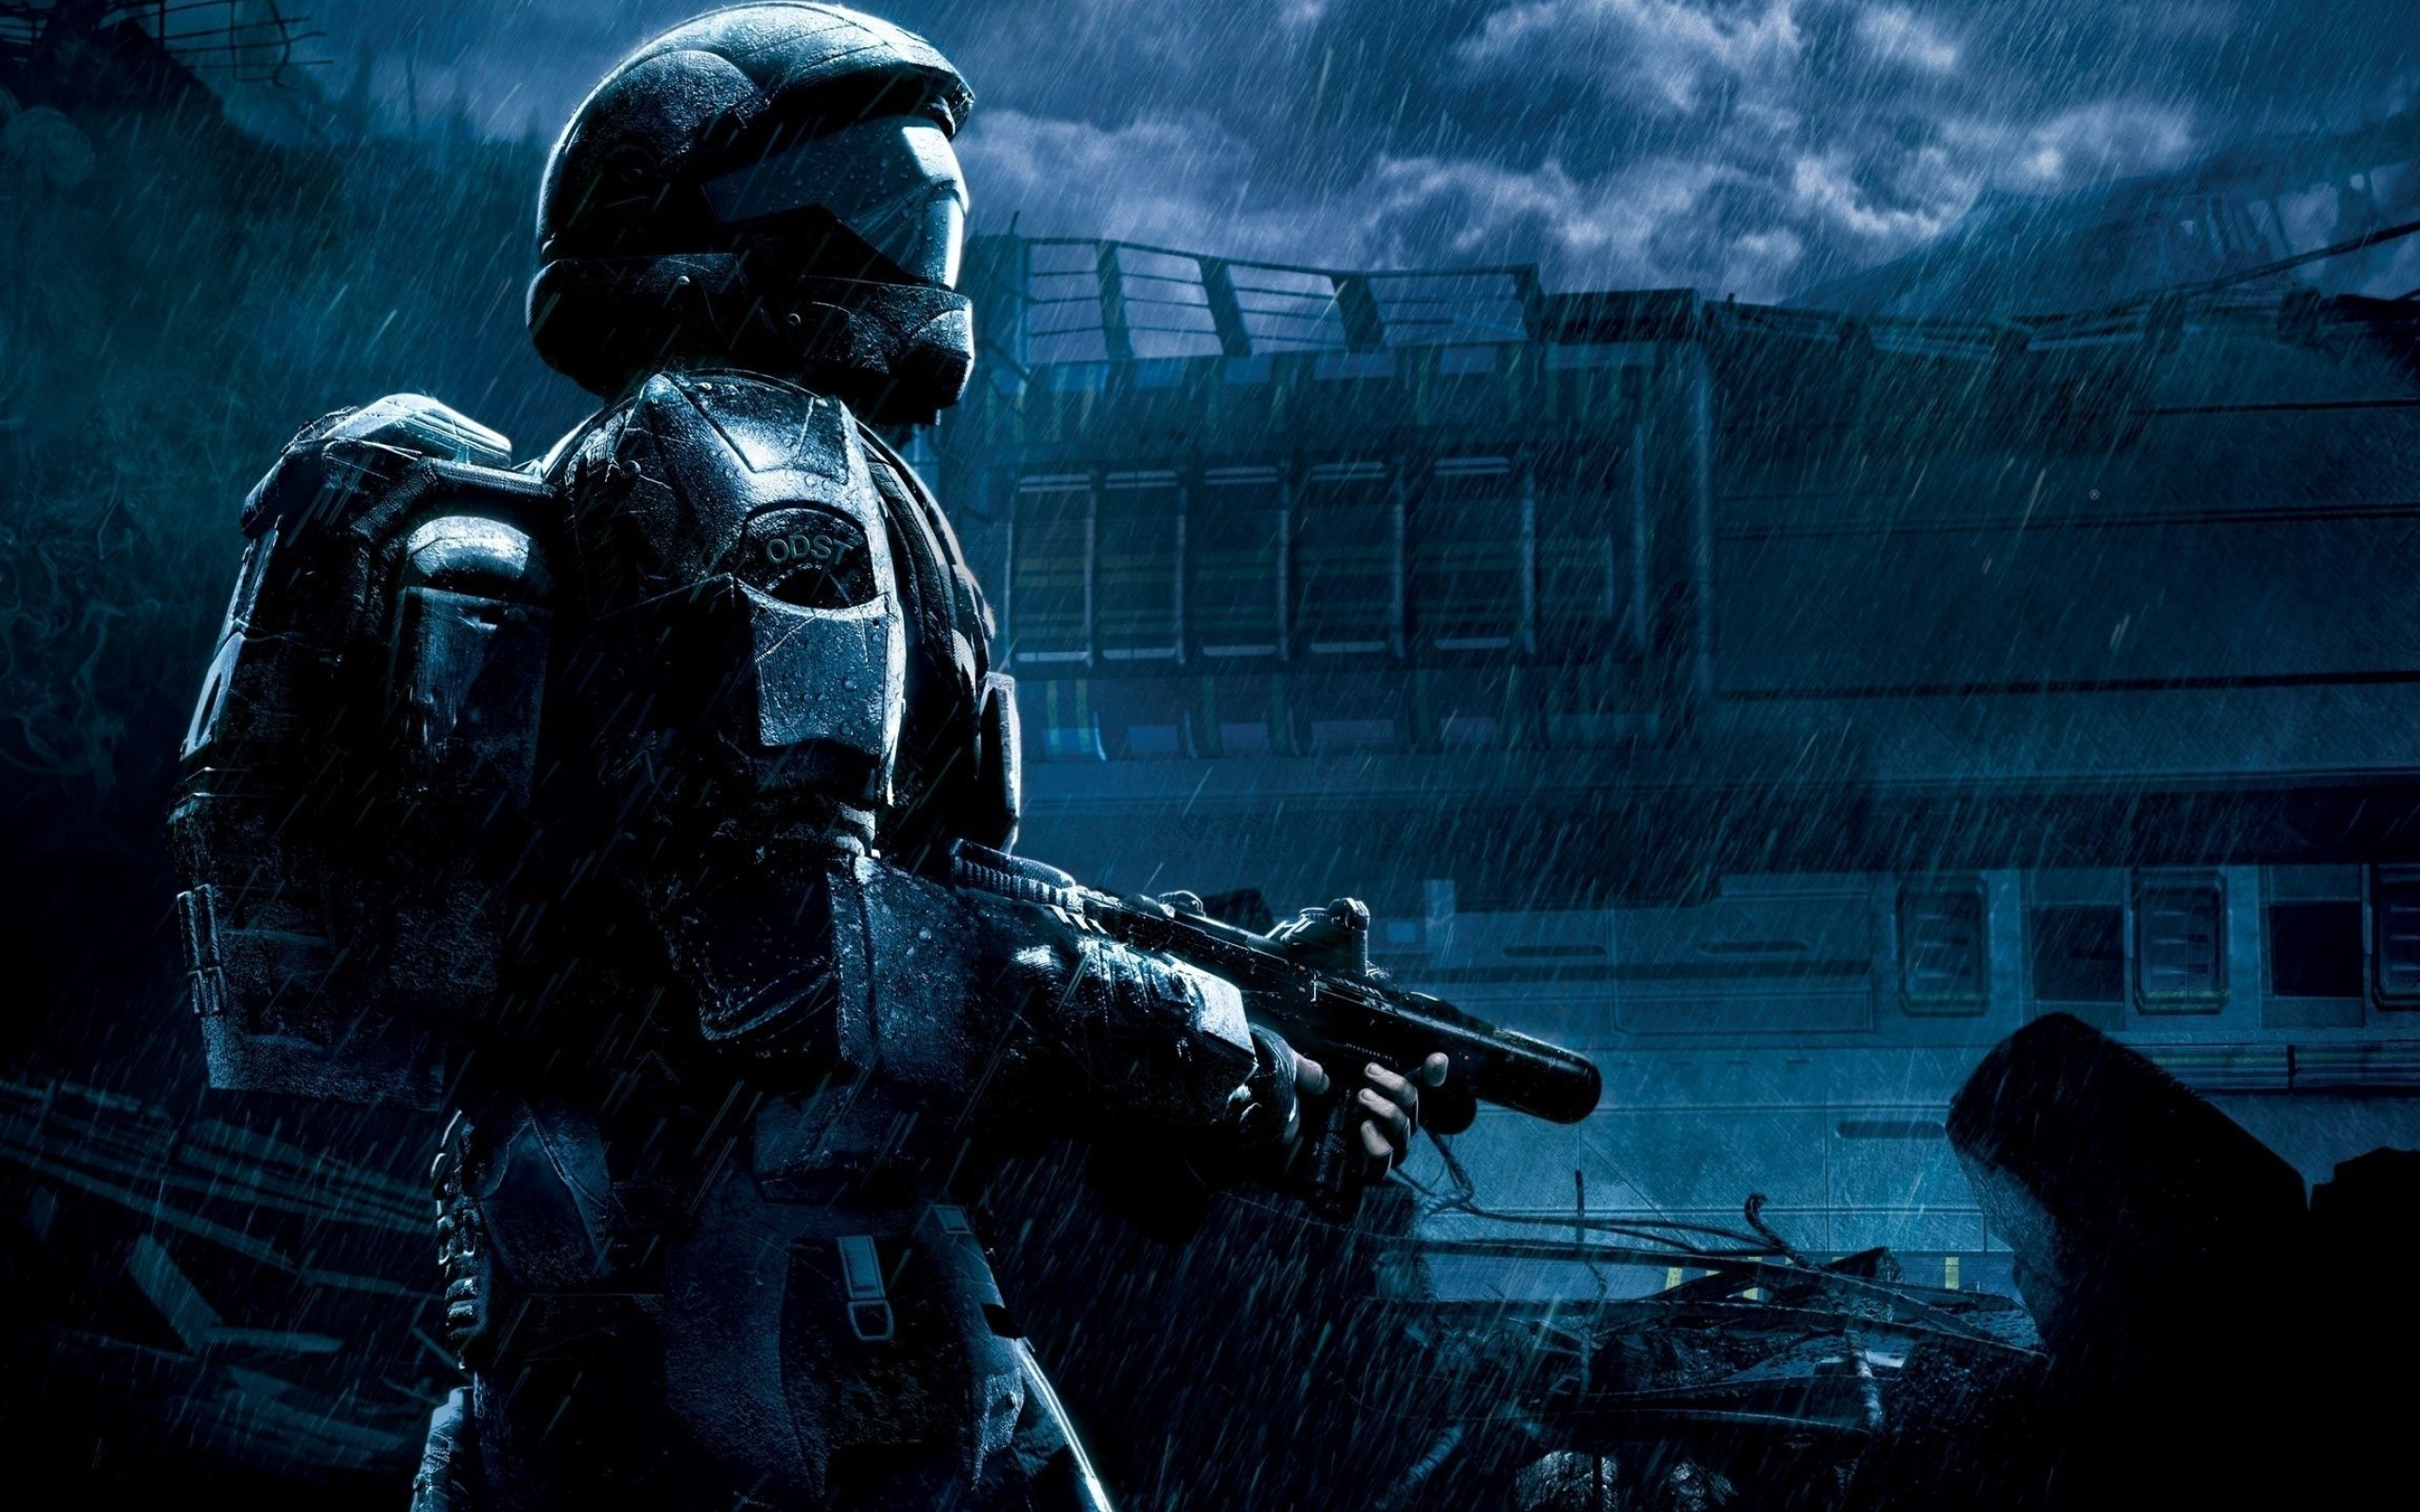 Halo 3: ODST, Top free background, Halo-themed wallpapers, Gaming visuals, 2560x1600 HD Desktop